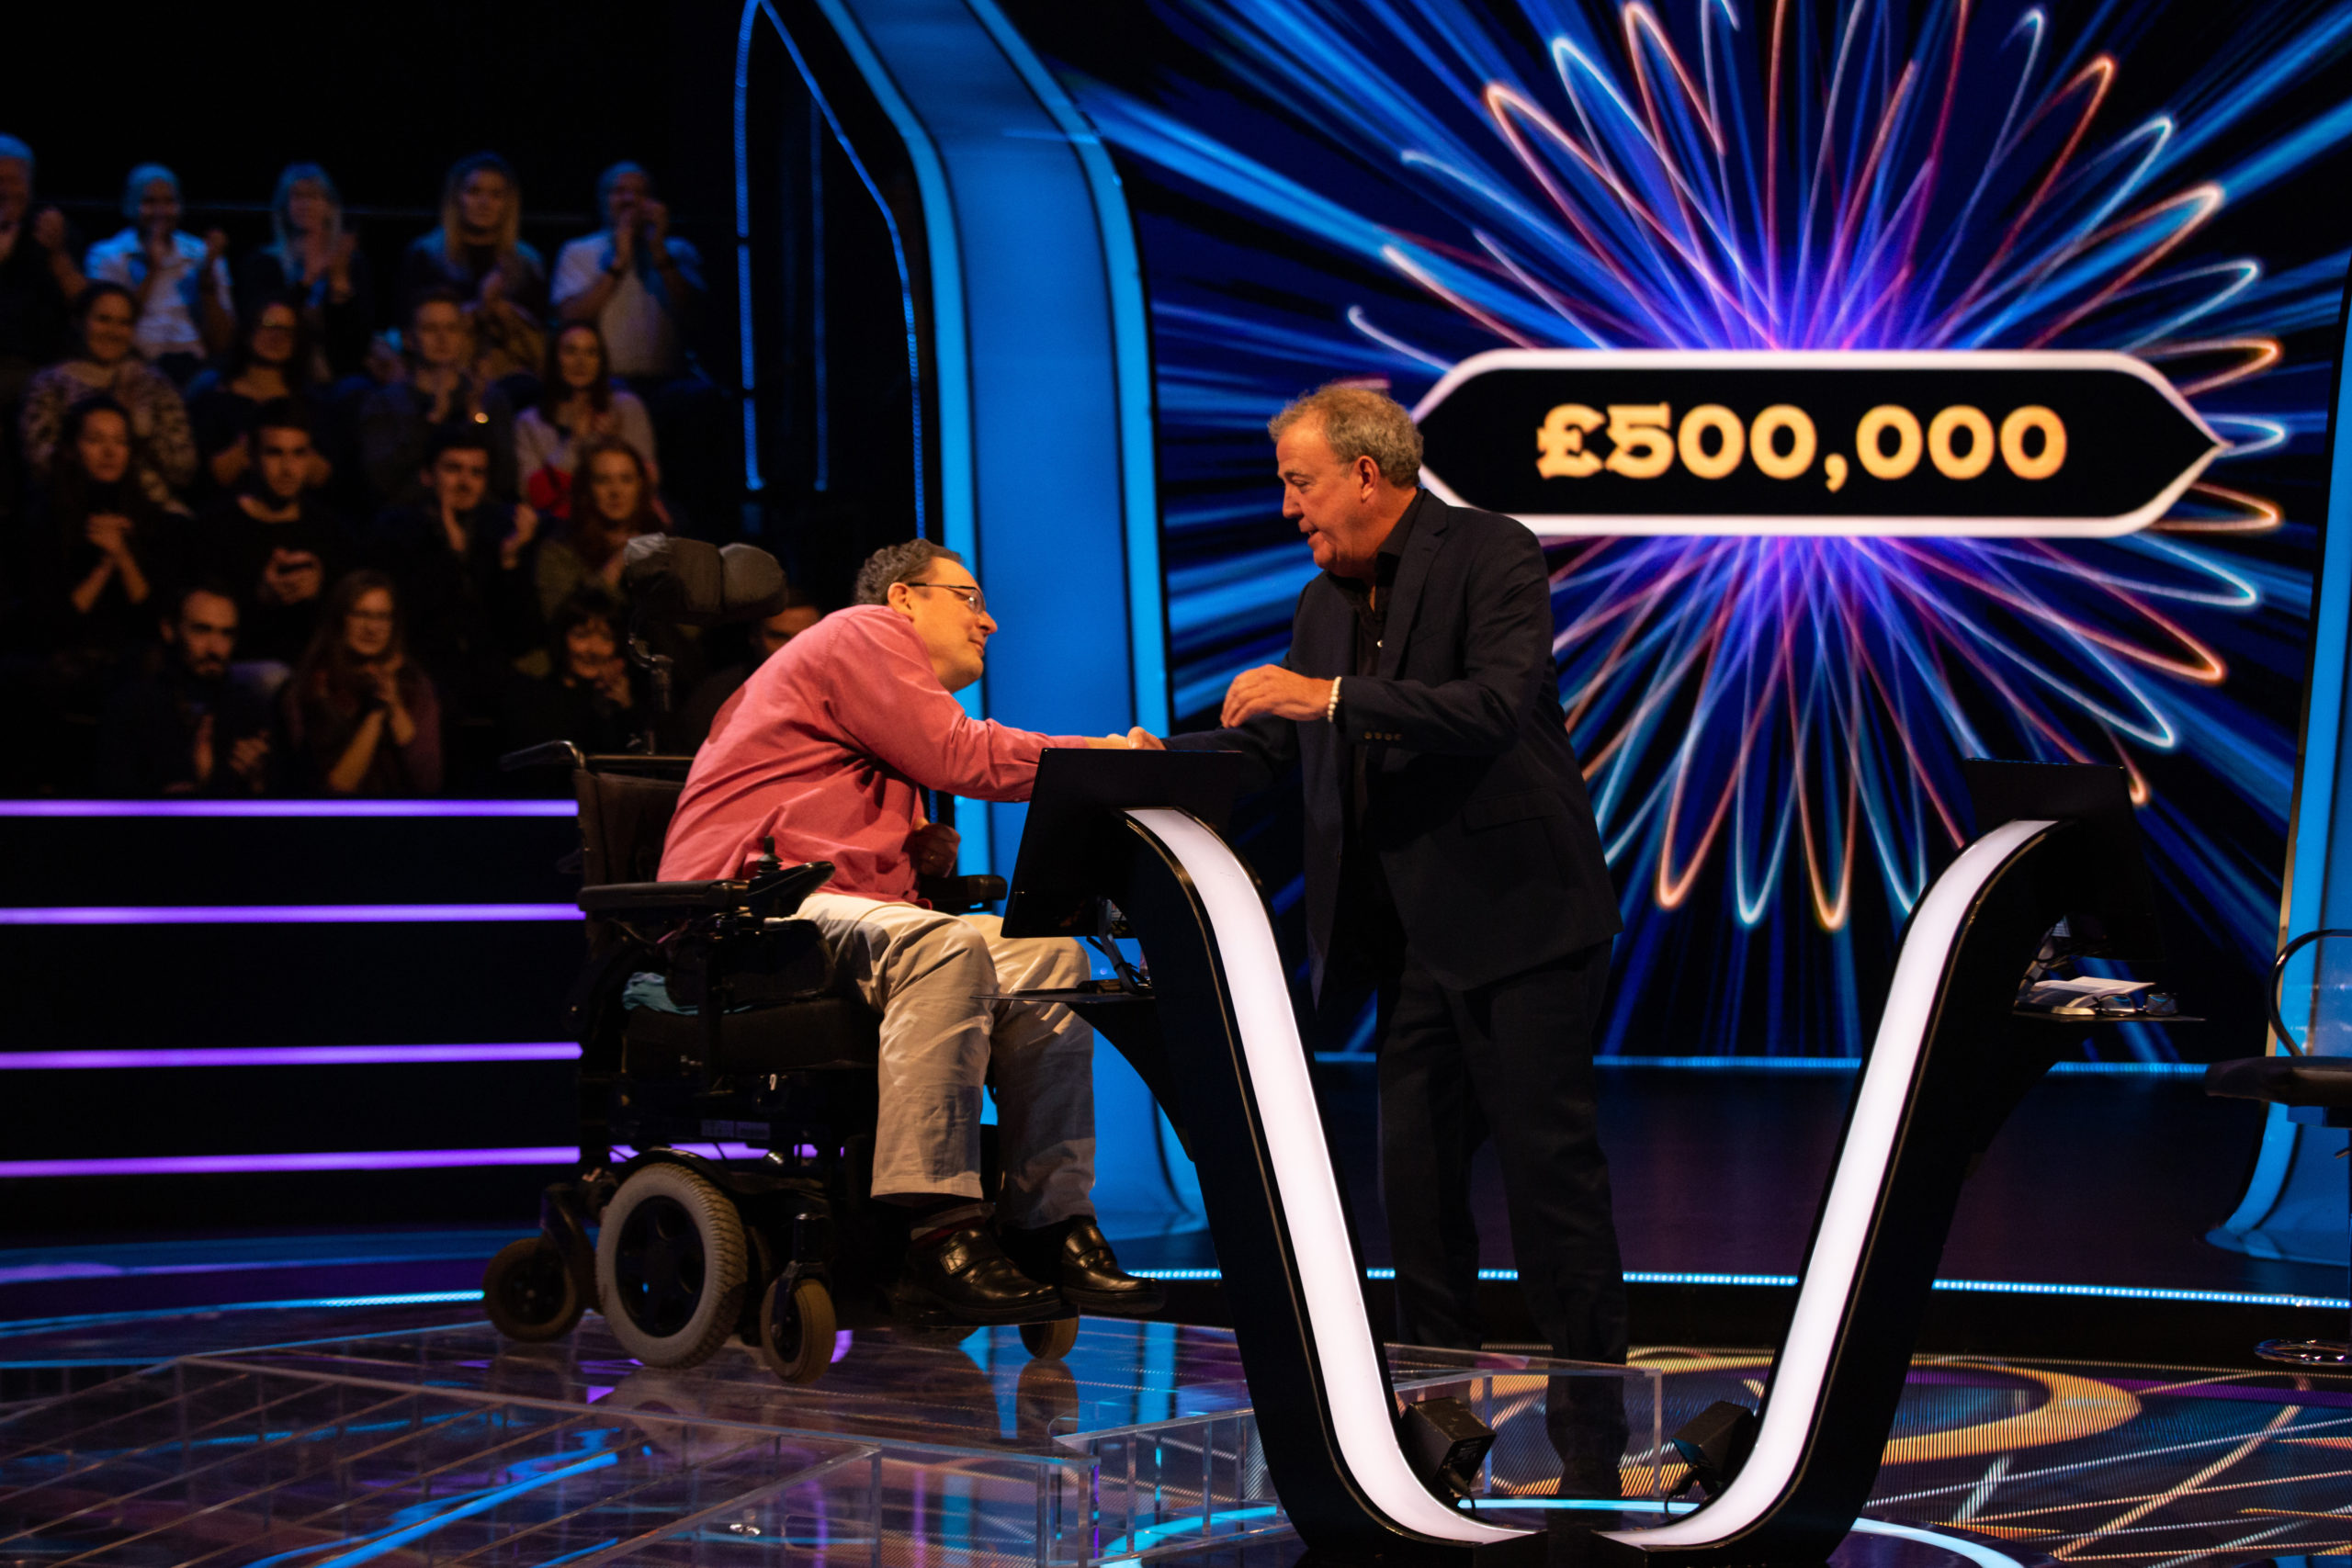 Contestant: Mr Townsley took home £500,000.